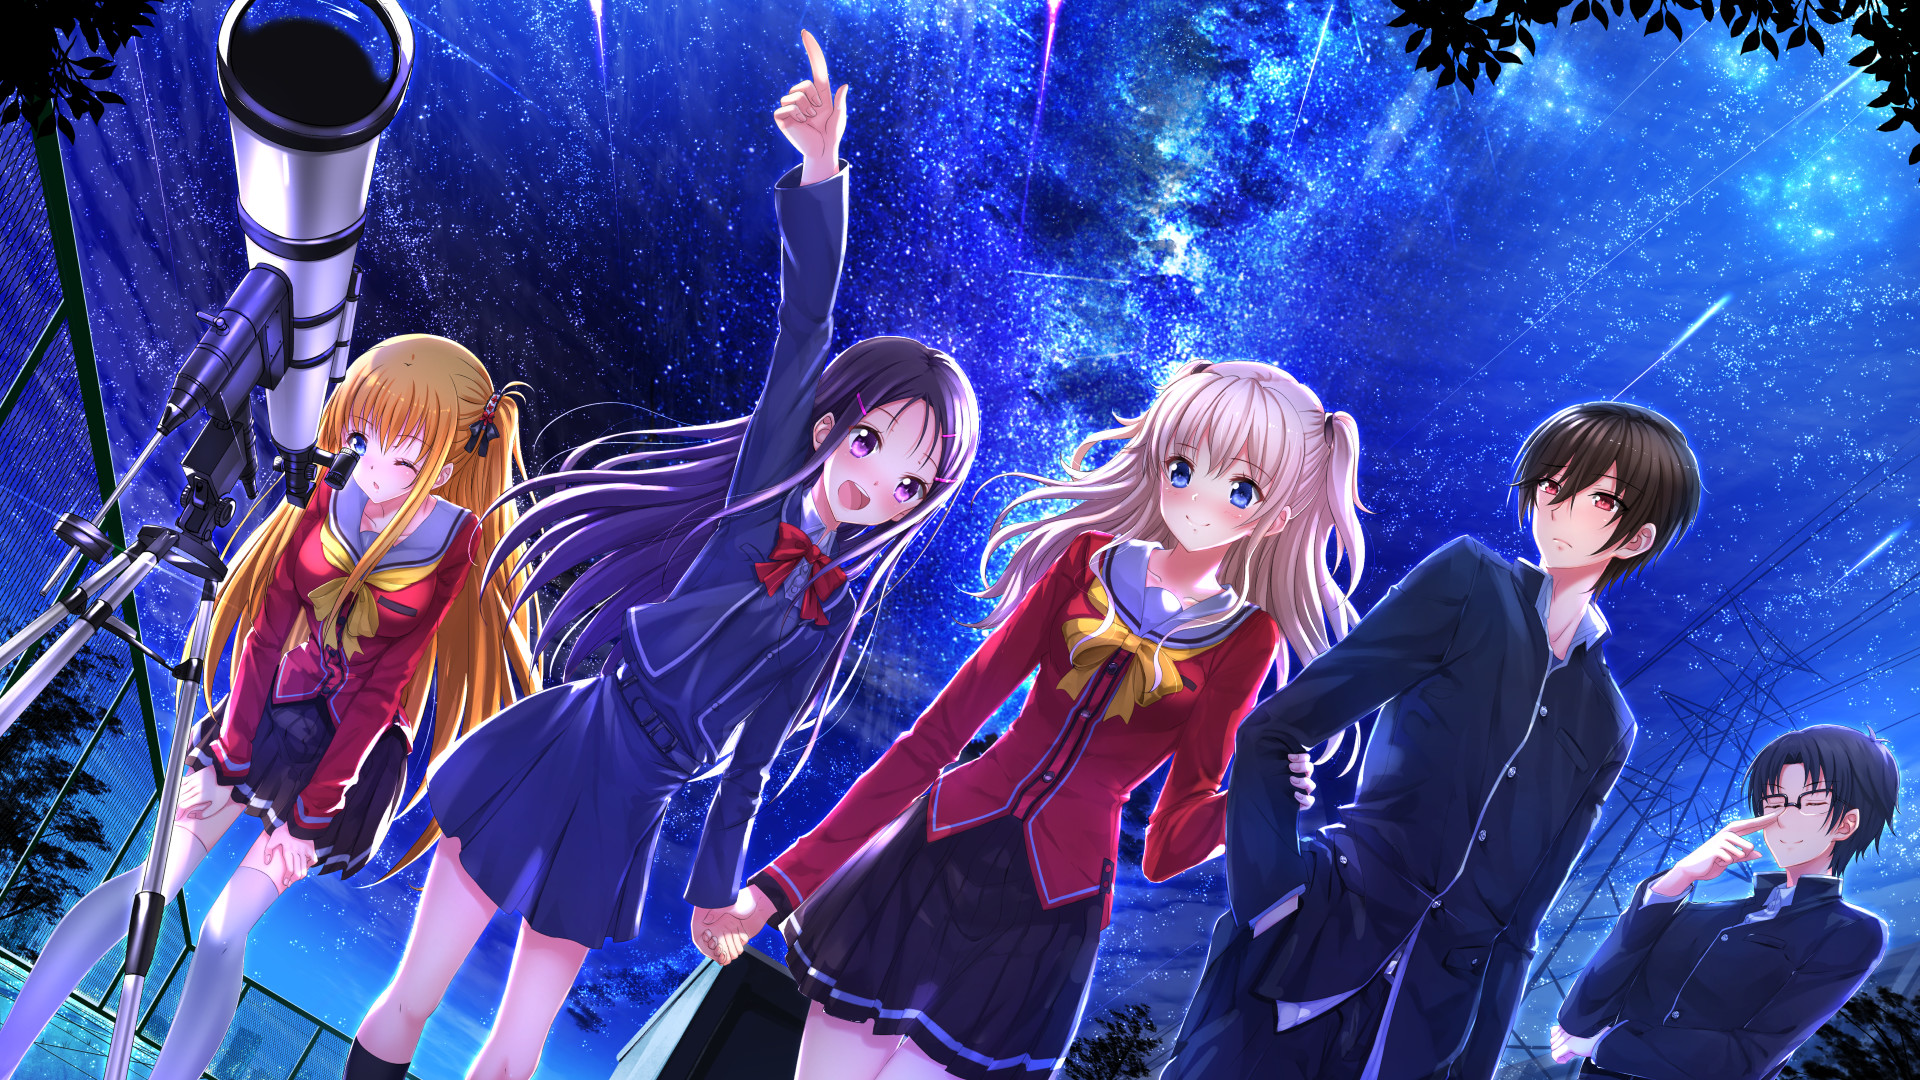 1920x1080 This is a very controversial show, means you are either going to love it or  hate it. If you liked anime of Jun Maeda's previous works then you must  watch ...